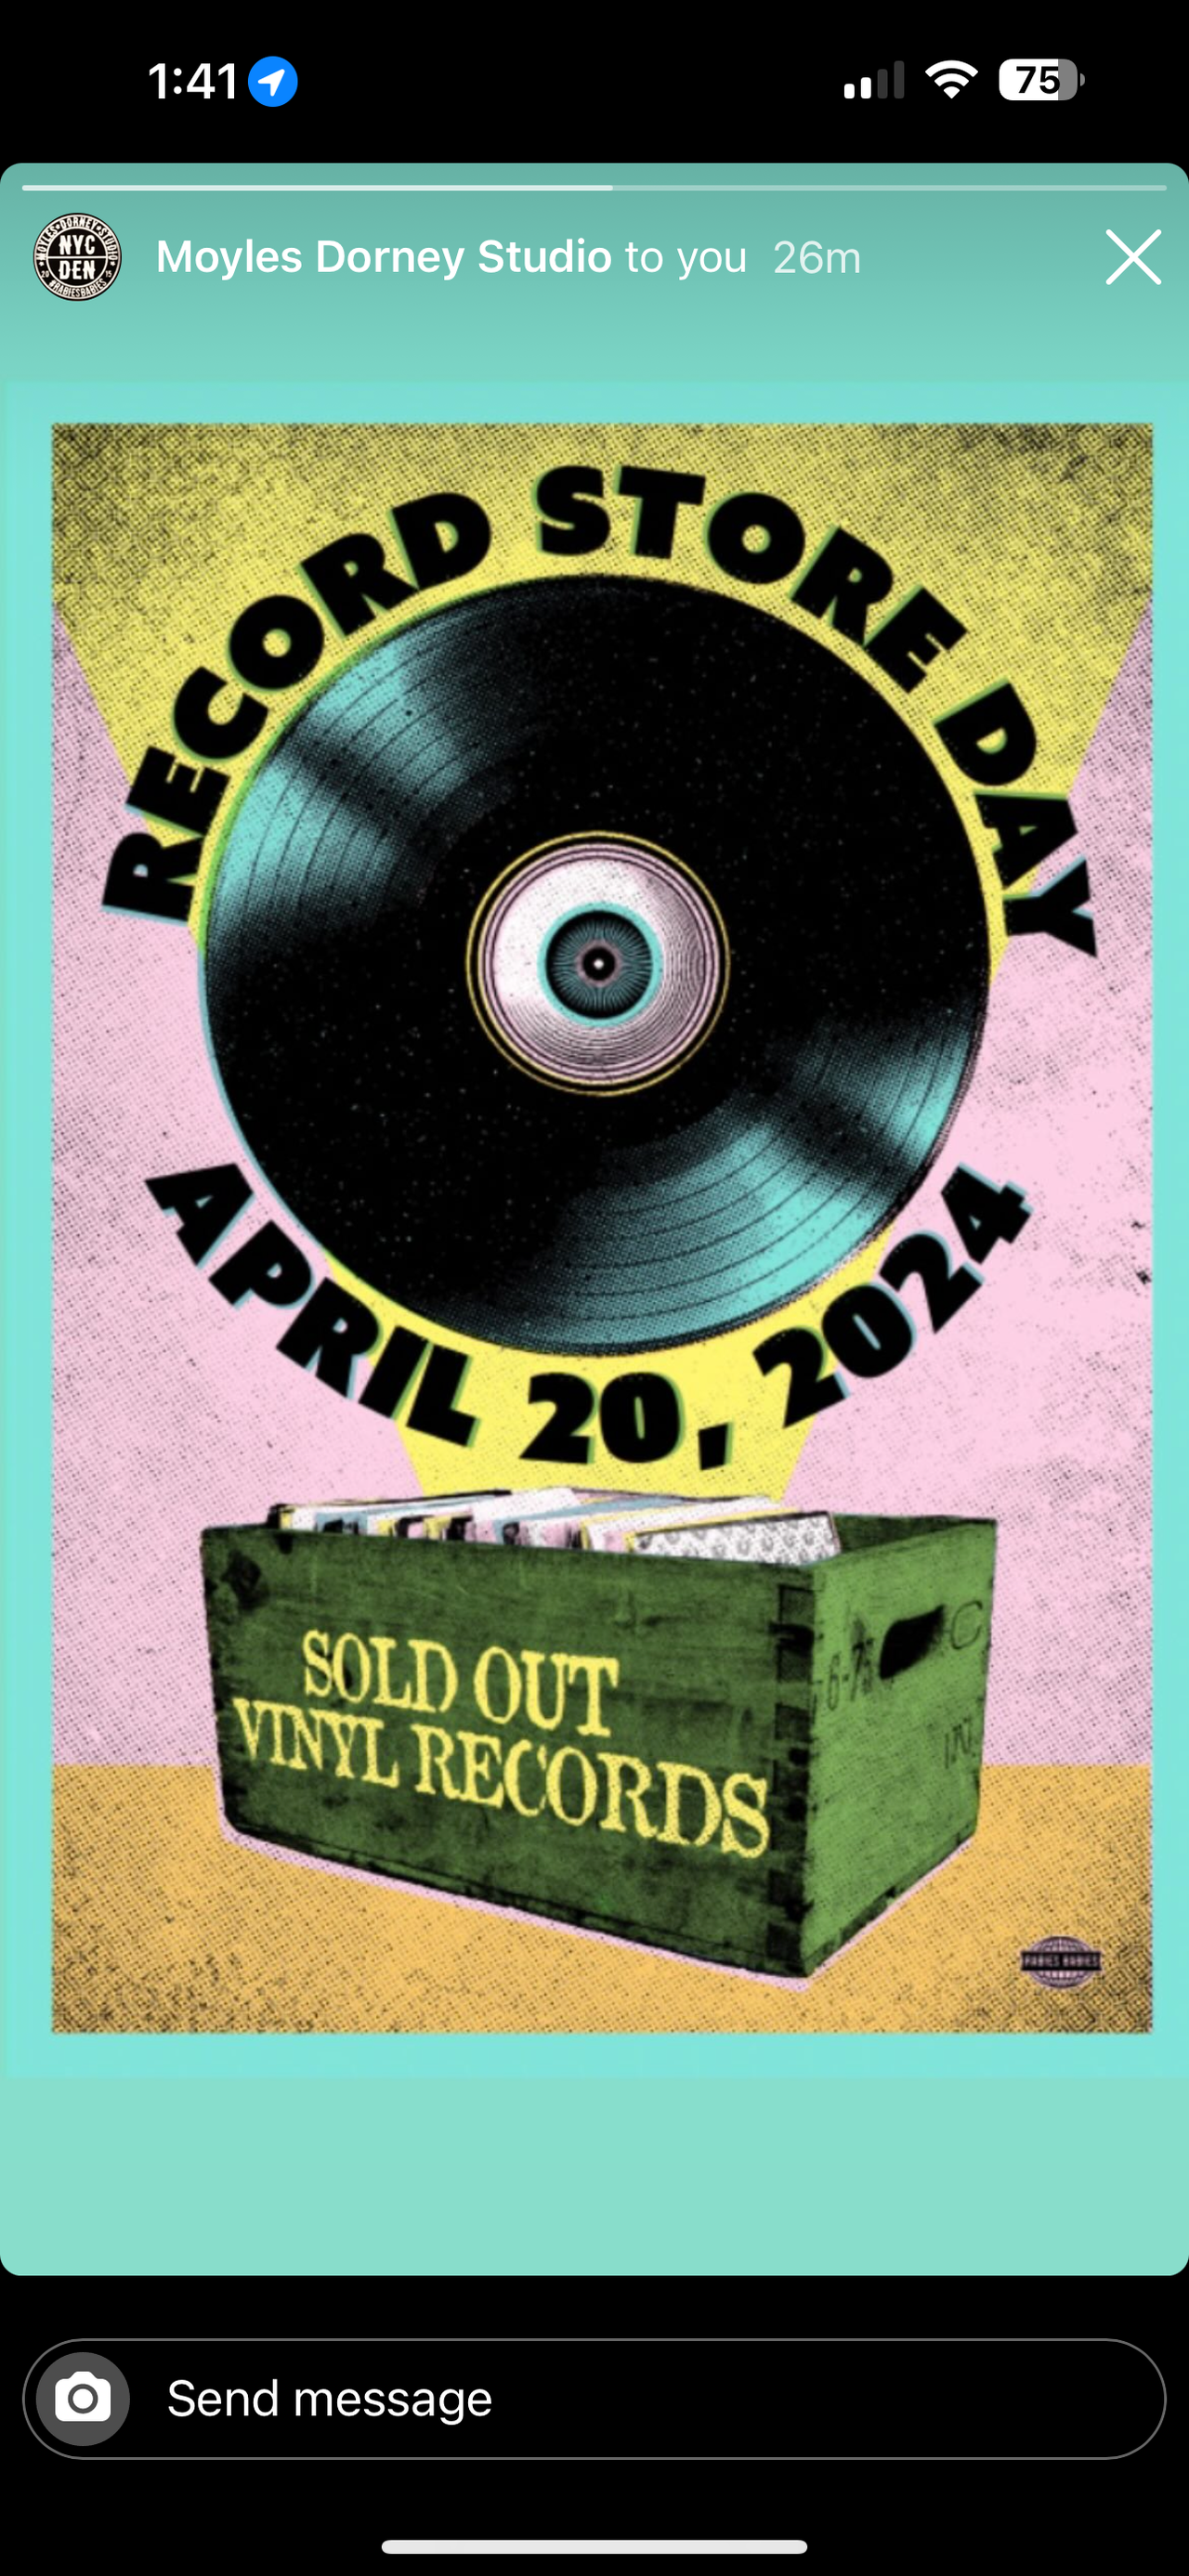 Sold Out Vinyl Records/Record Store Day Poster - Brendan Moyles Dorney AKA Rabies Babies